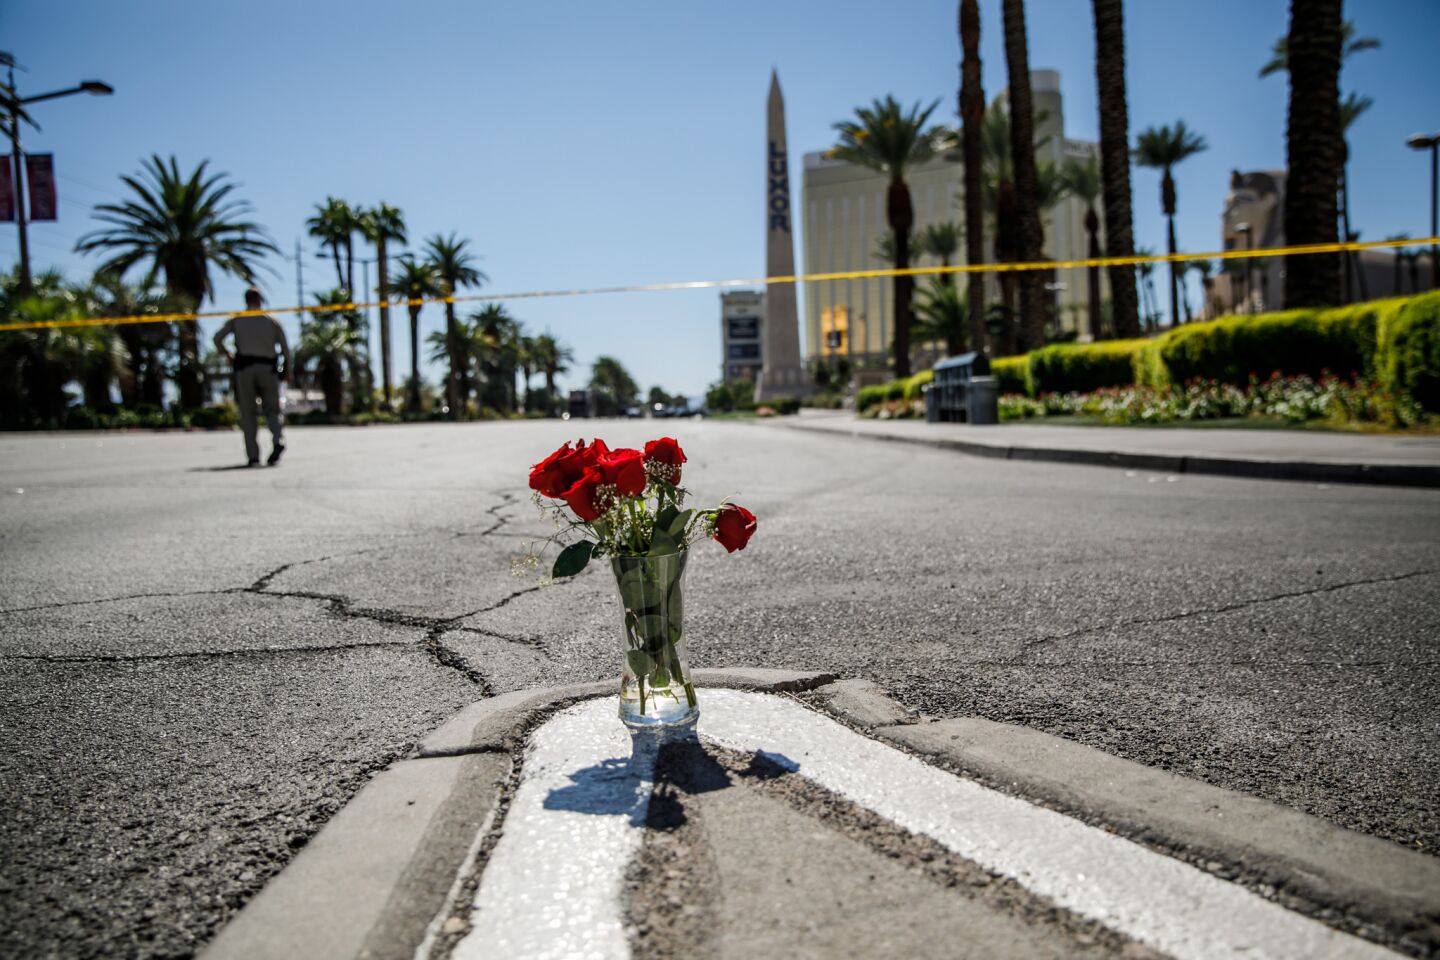 Flowers are left behind for victims of the mass shooting in Las Vegas.